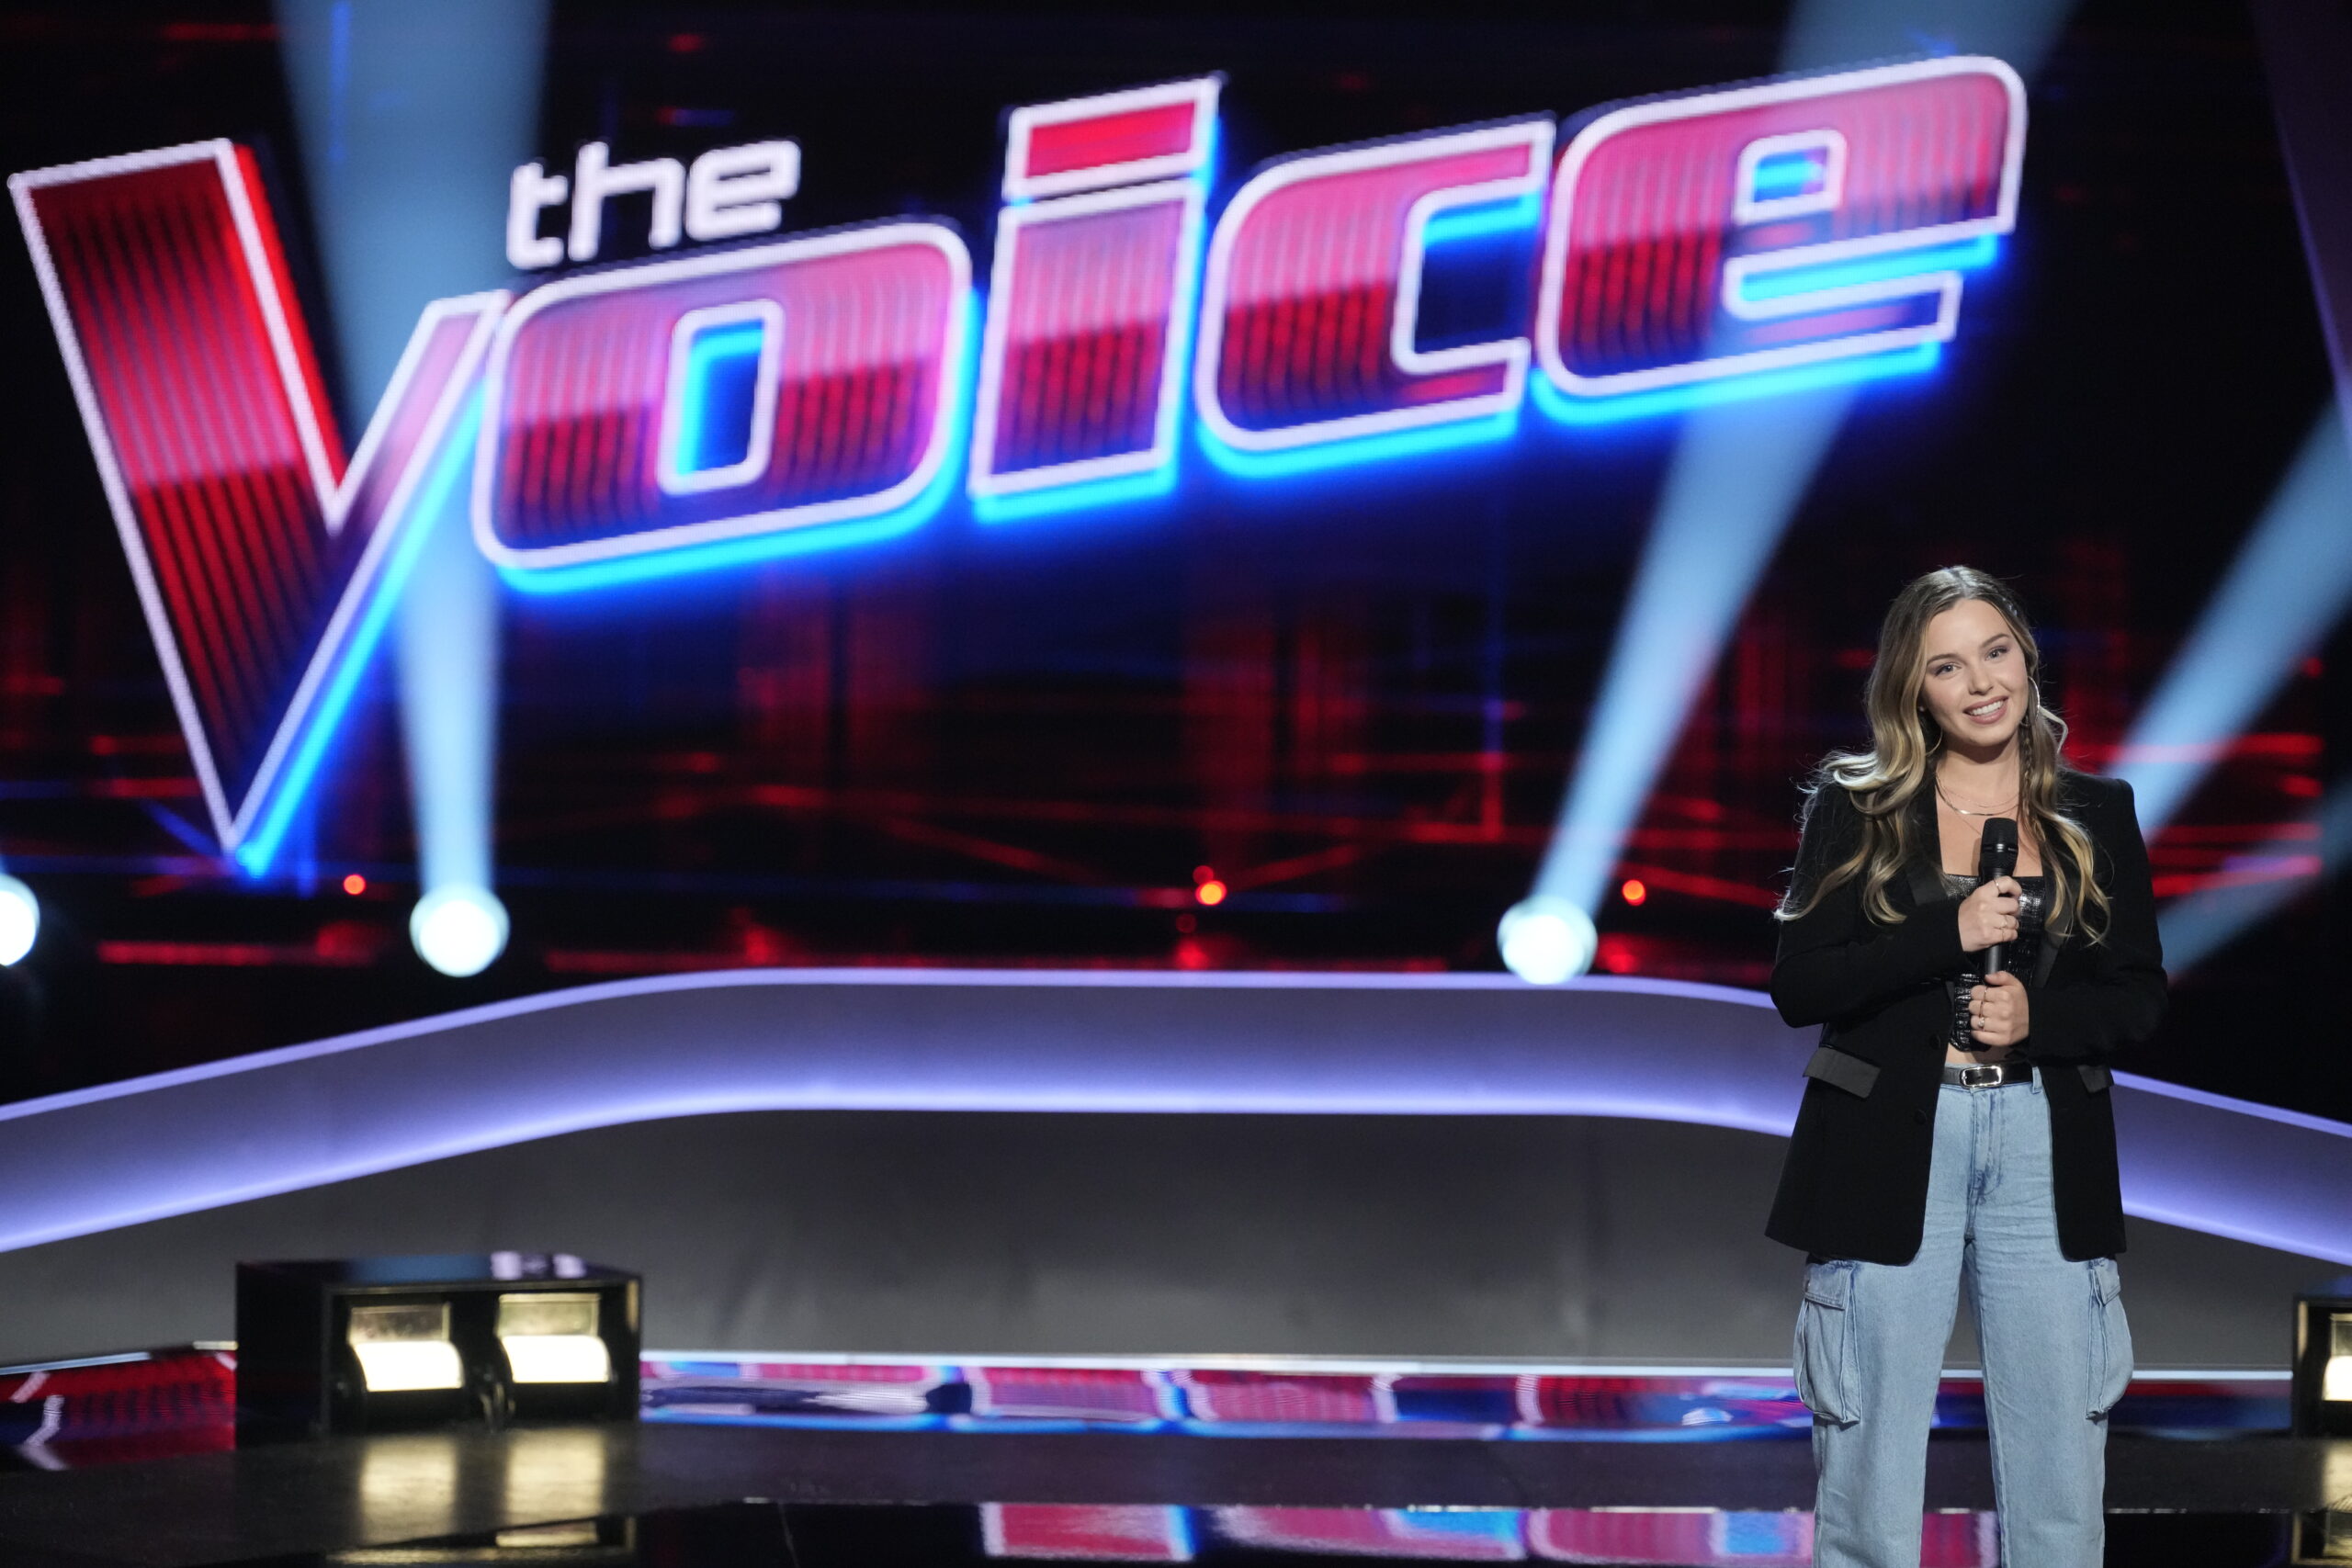 Bach to Rock Alum, Claudia B., Wows Judges on NBC's The Voice, and Joins Team Legend